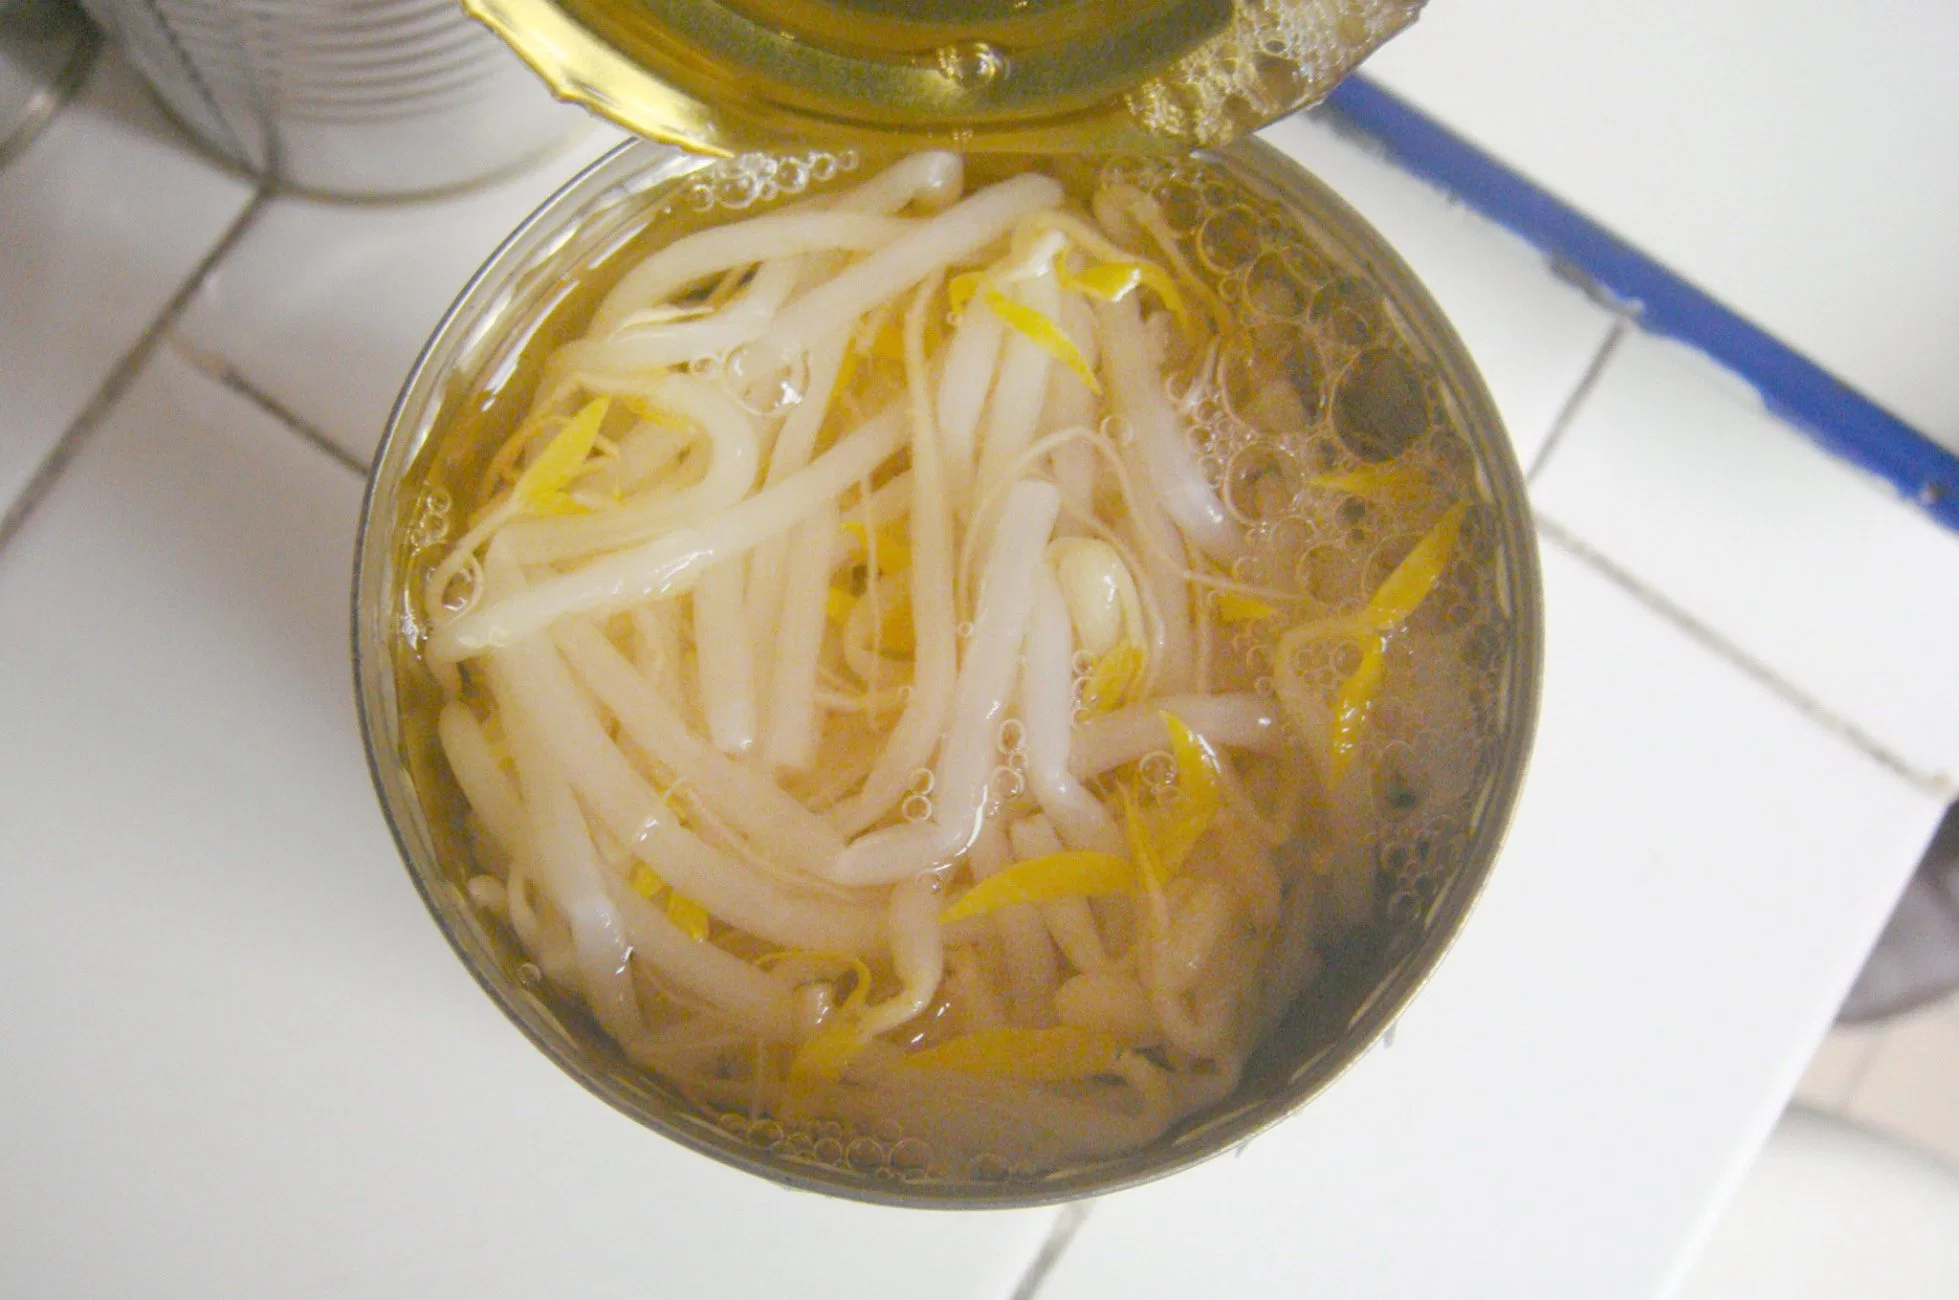 Canned Vegetables Fresh Bean Sprouts with Private label